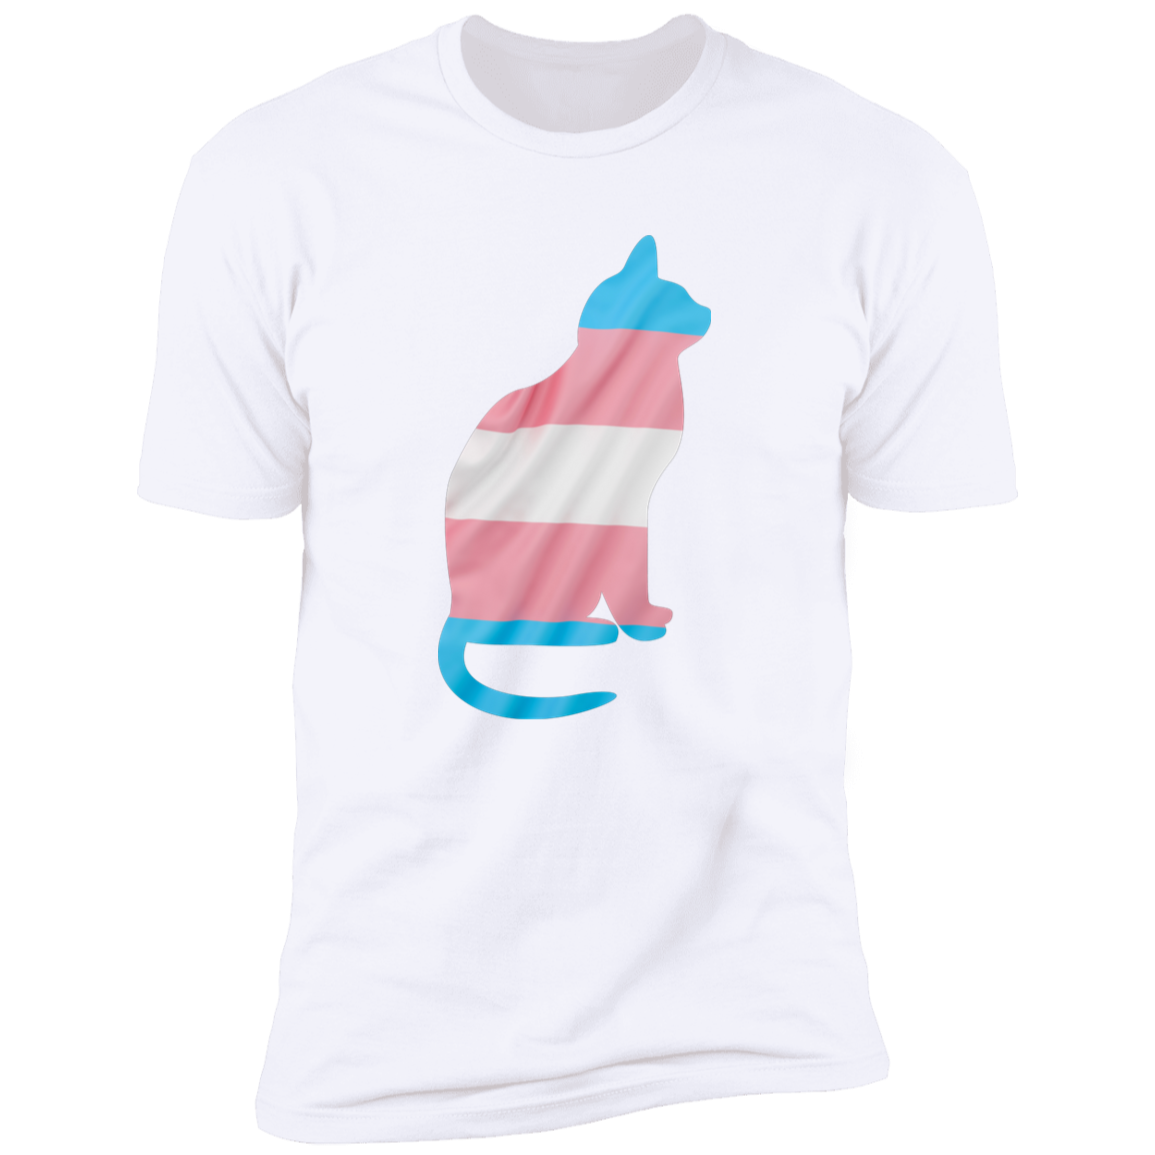 Trans Pride Cat Pride T-shirt, Trans Pride Cat Shirt for humans, in white